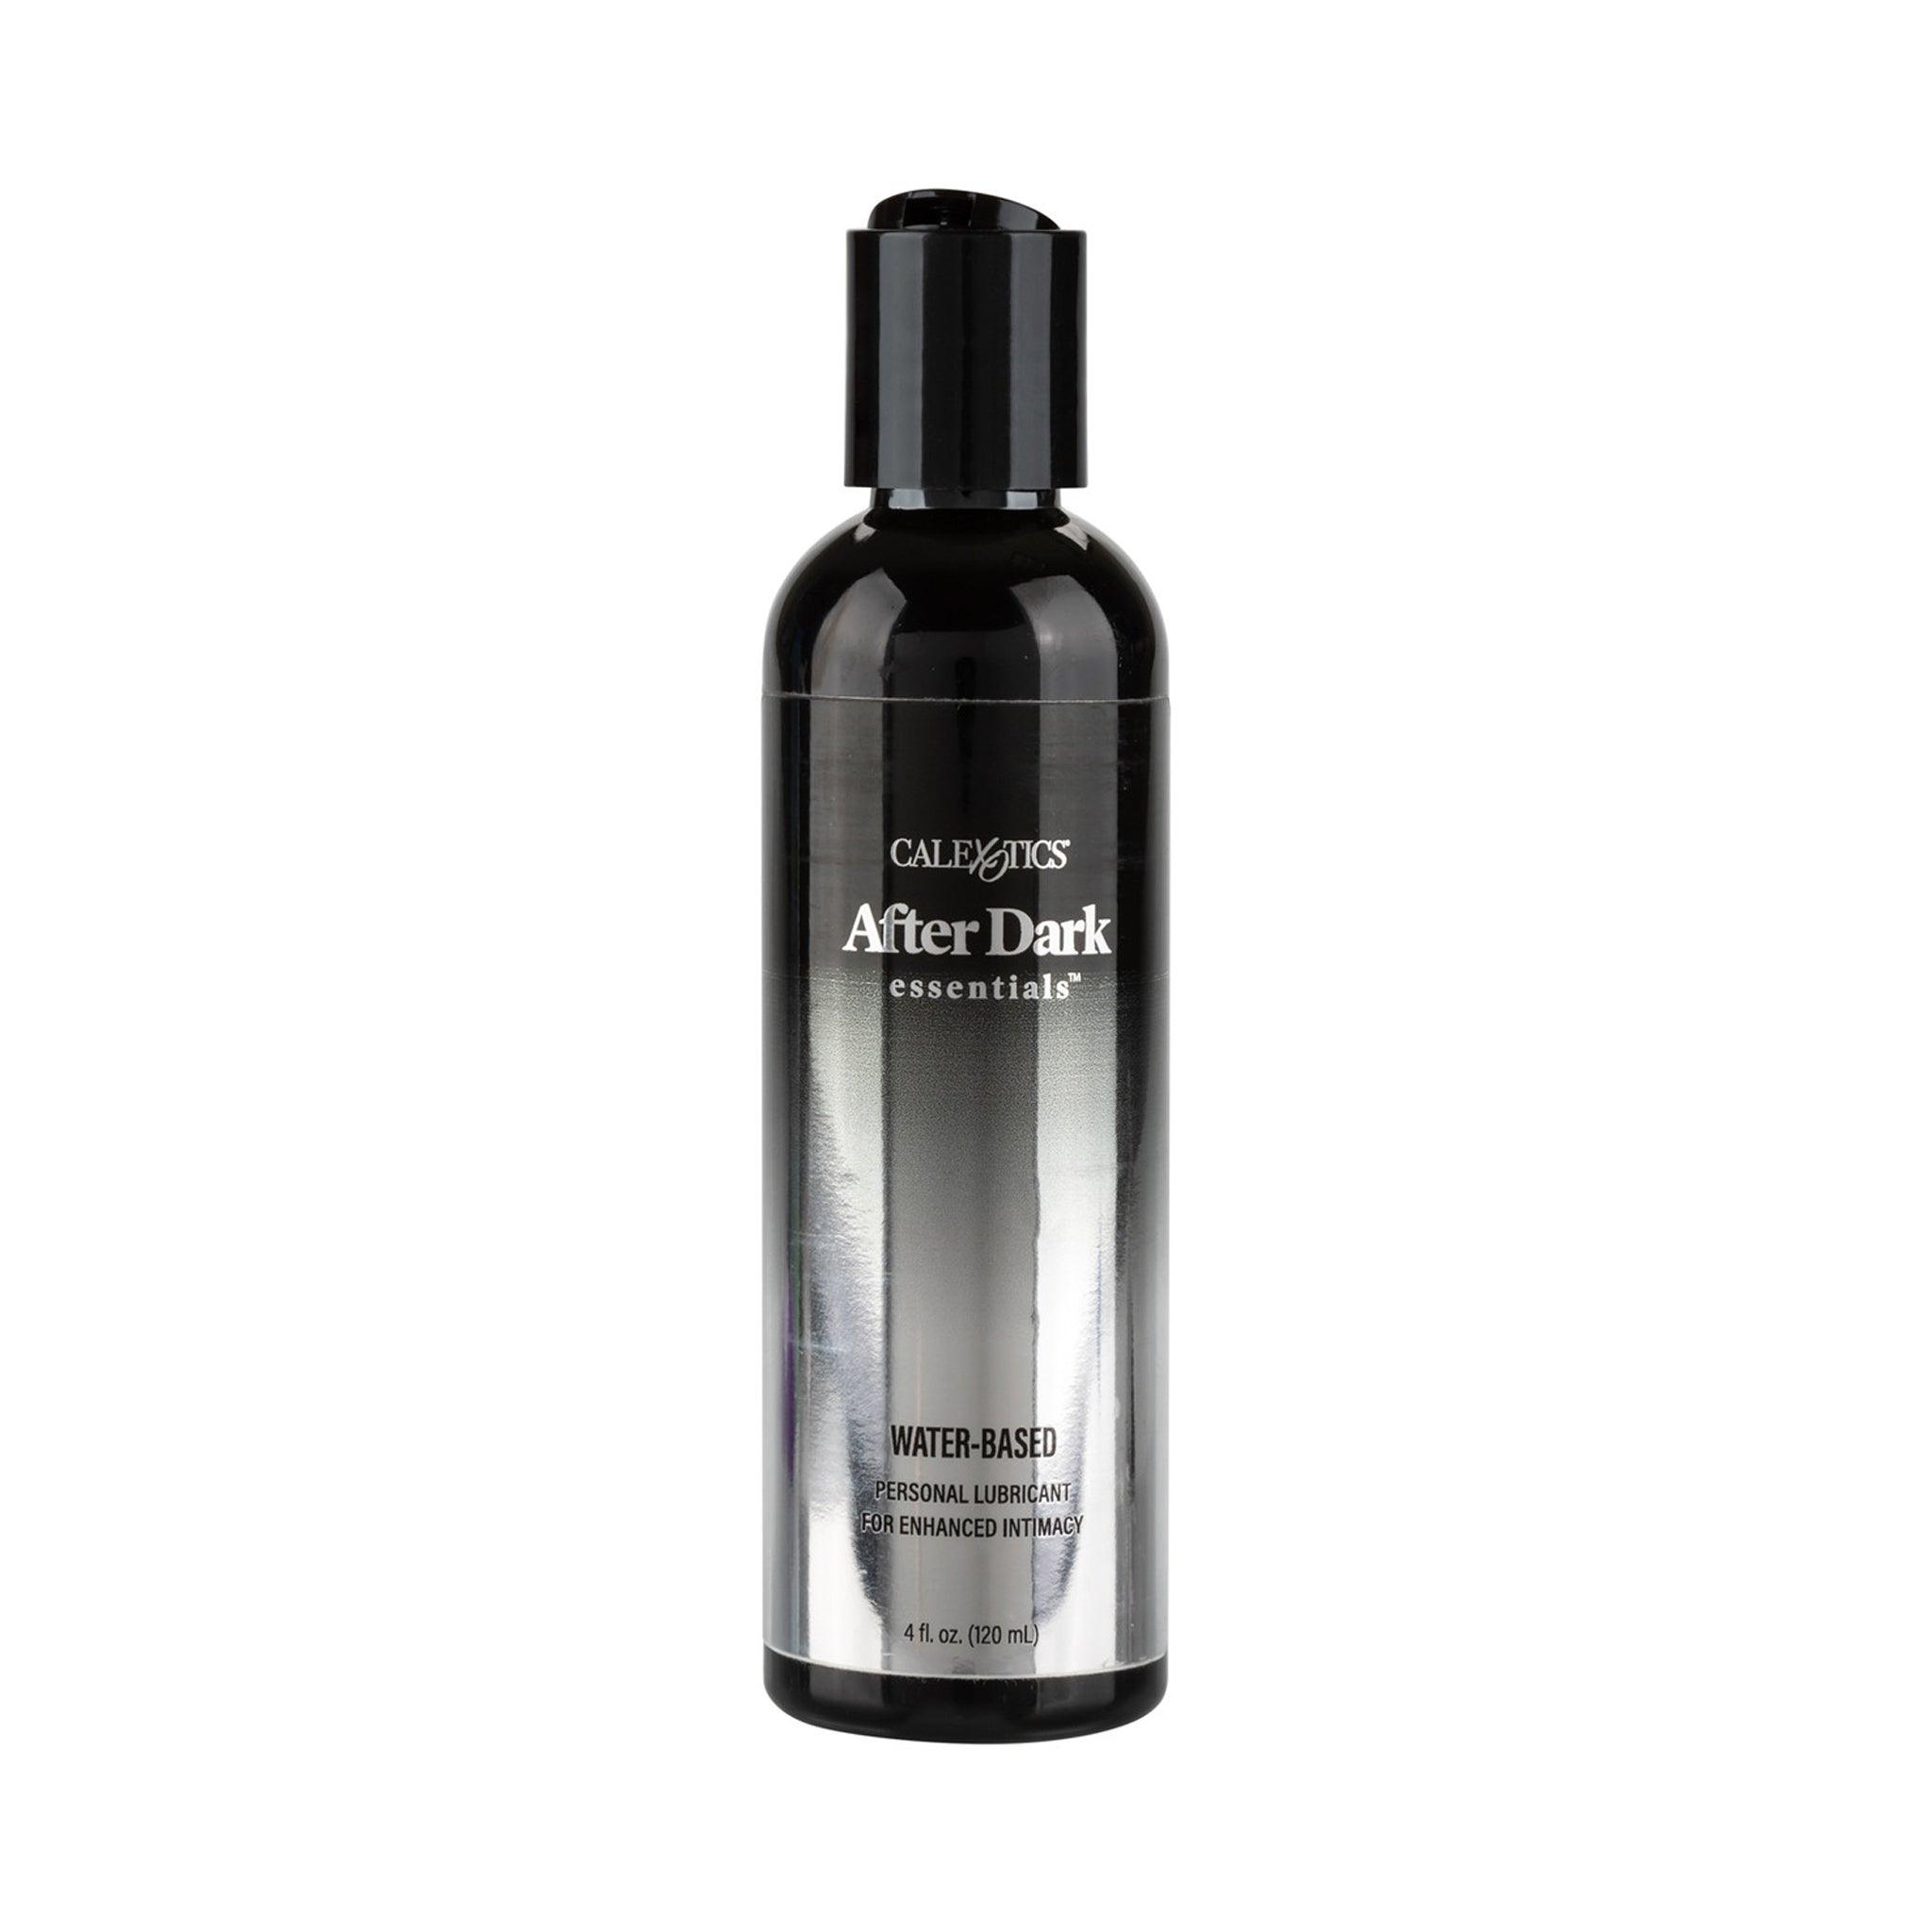 After Dark Essentials Water-Based Personal Lubricant 4 oz (120 mL) - CheapLubes.com